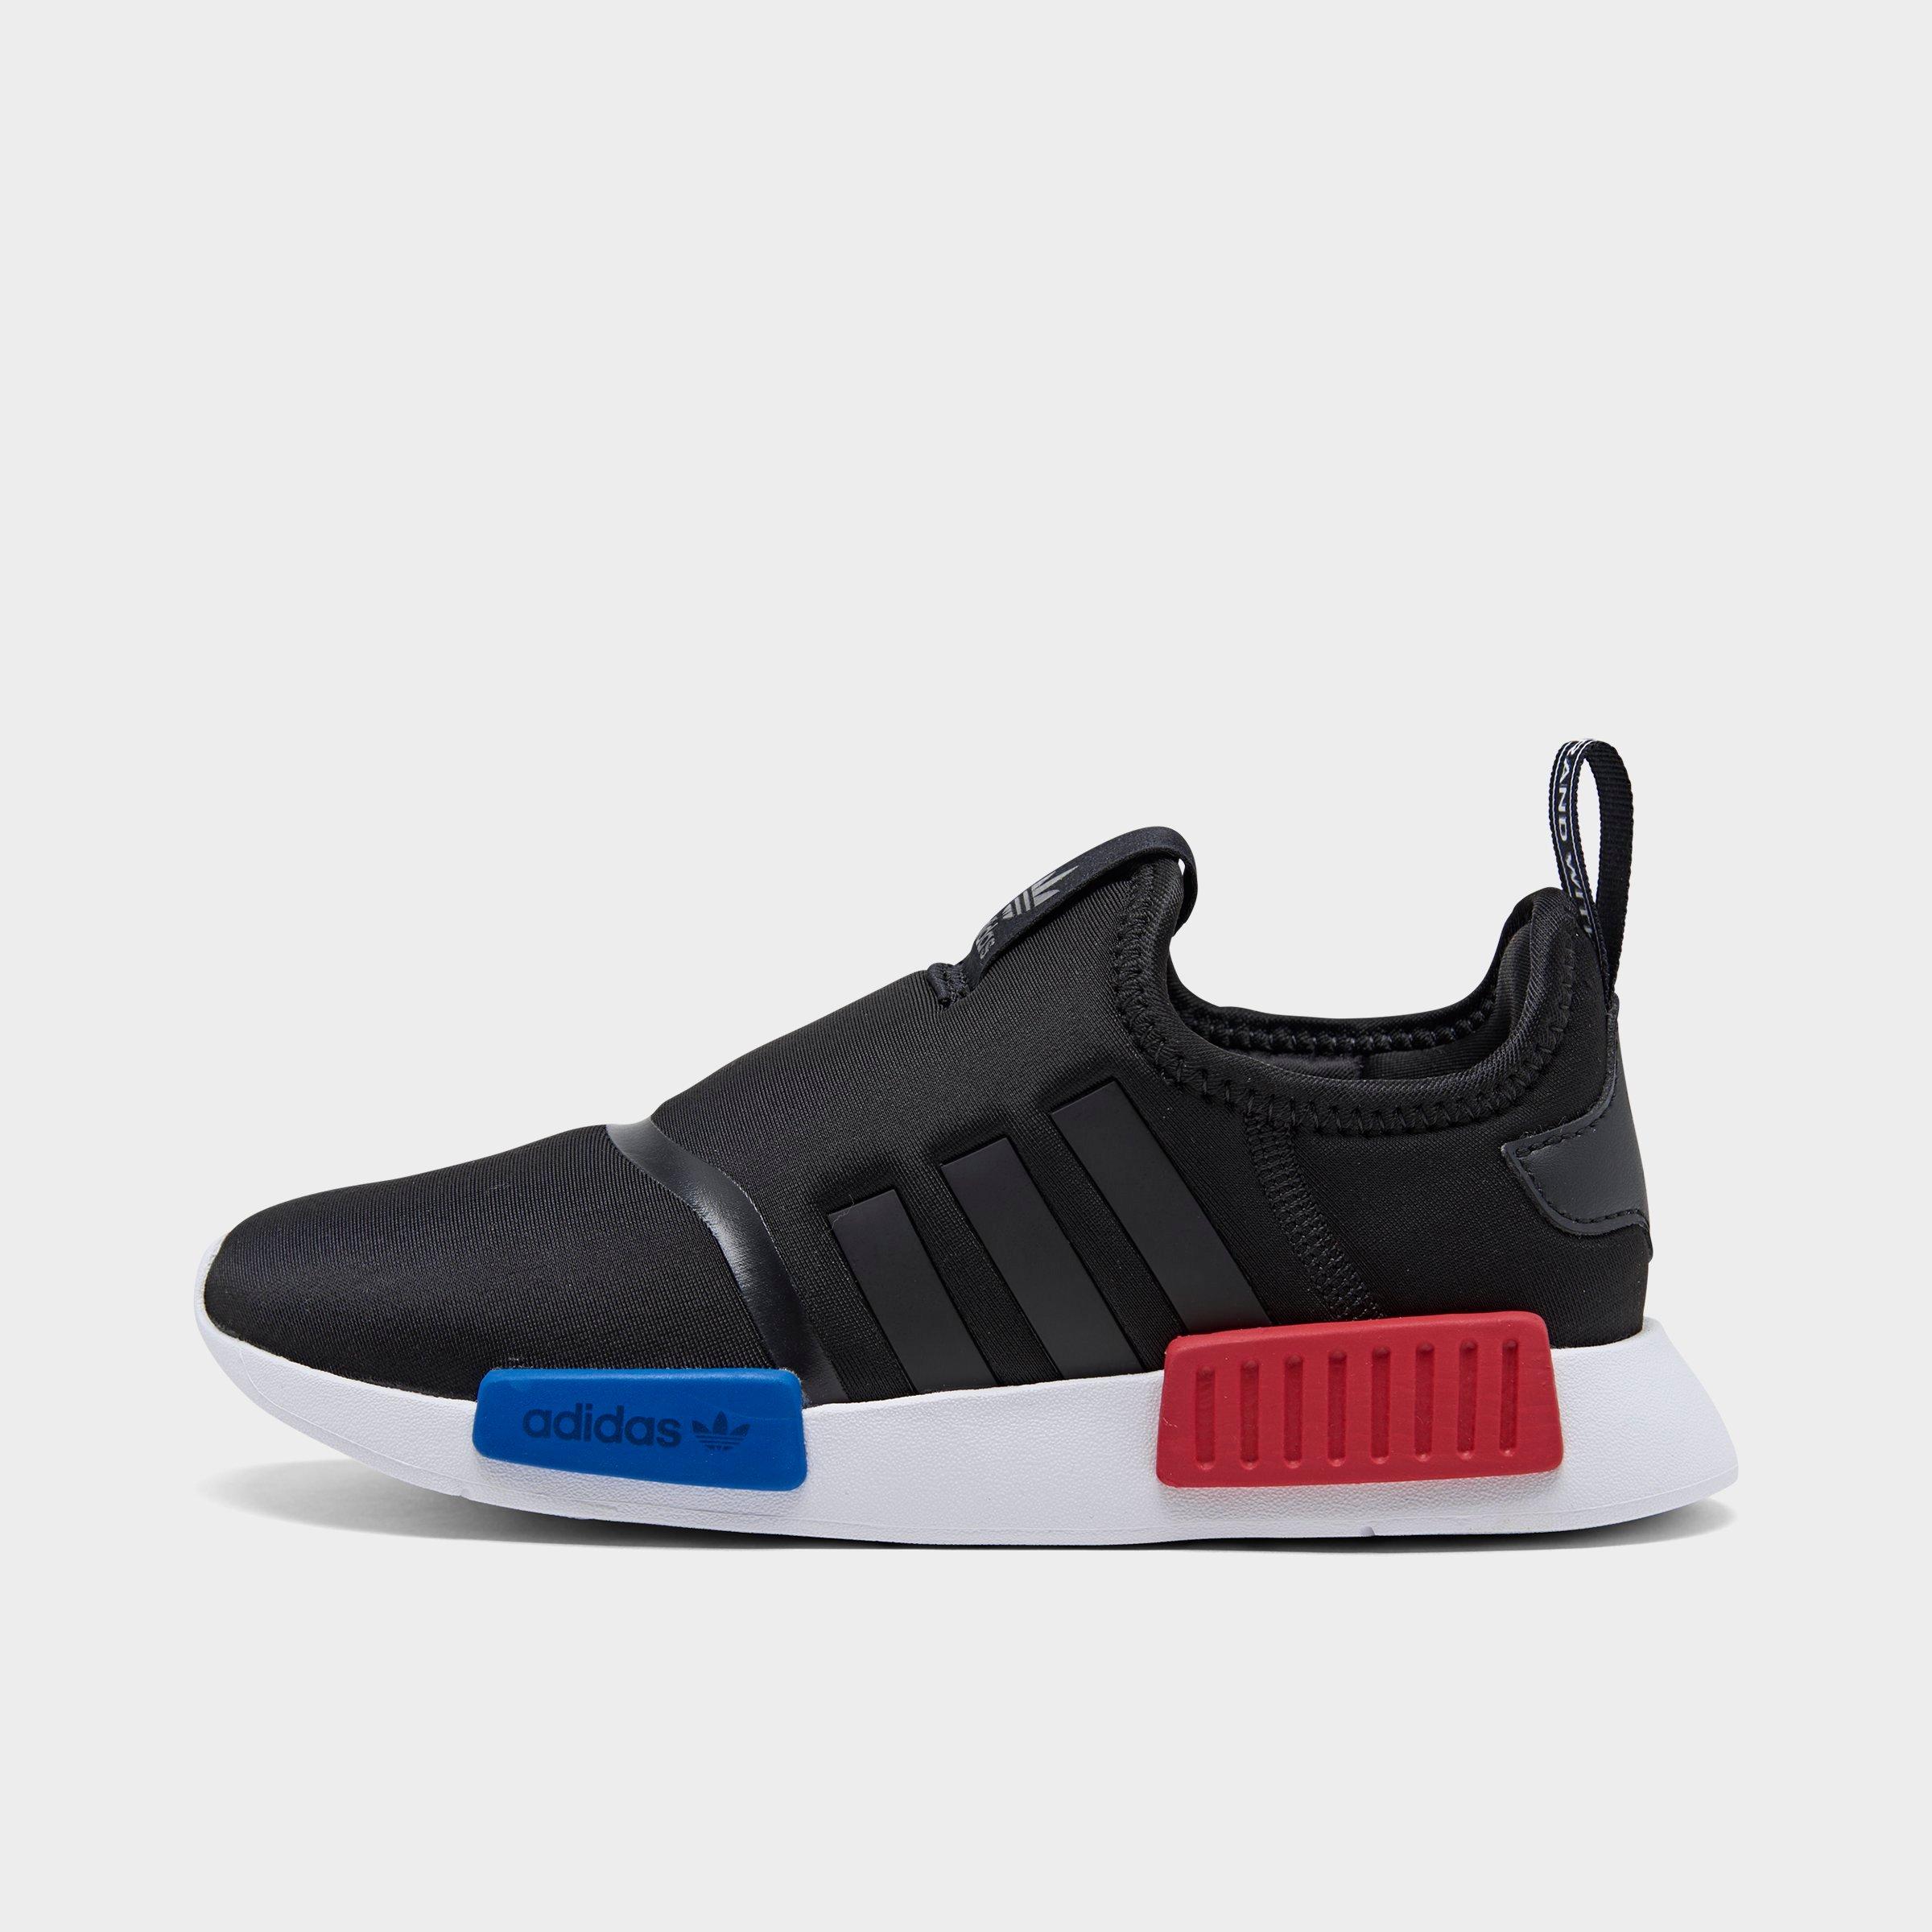 adidas nmd youth size 3.5